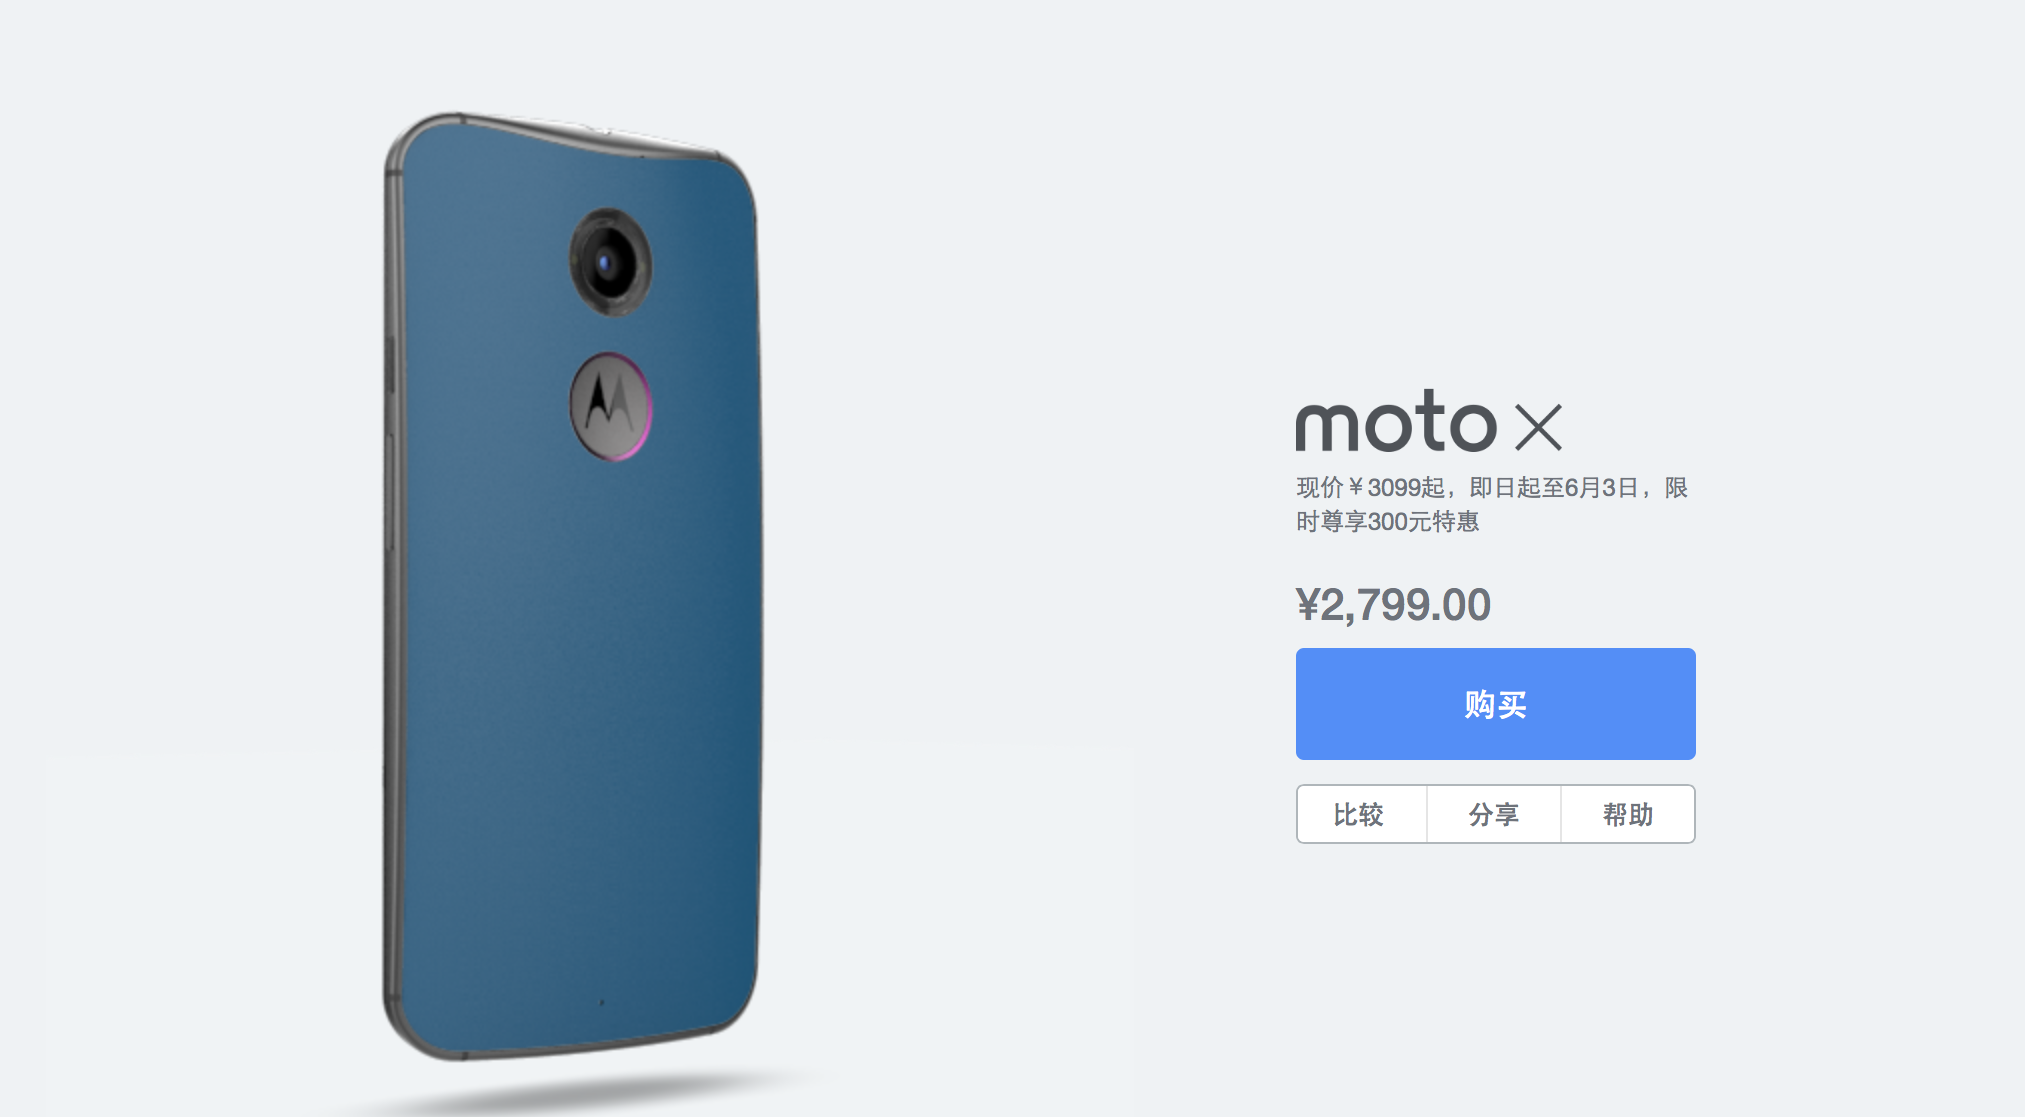 Motorola launches its Moto Maker service in China